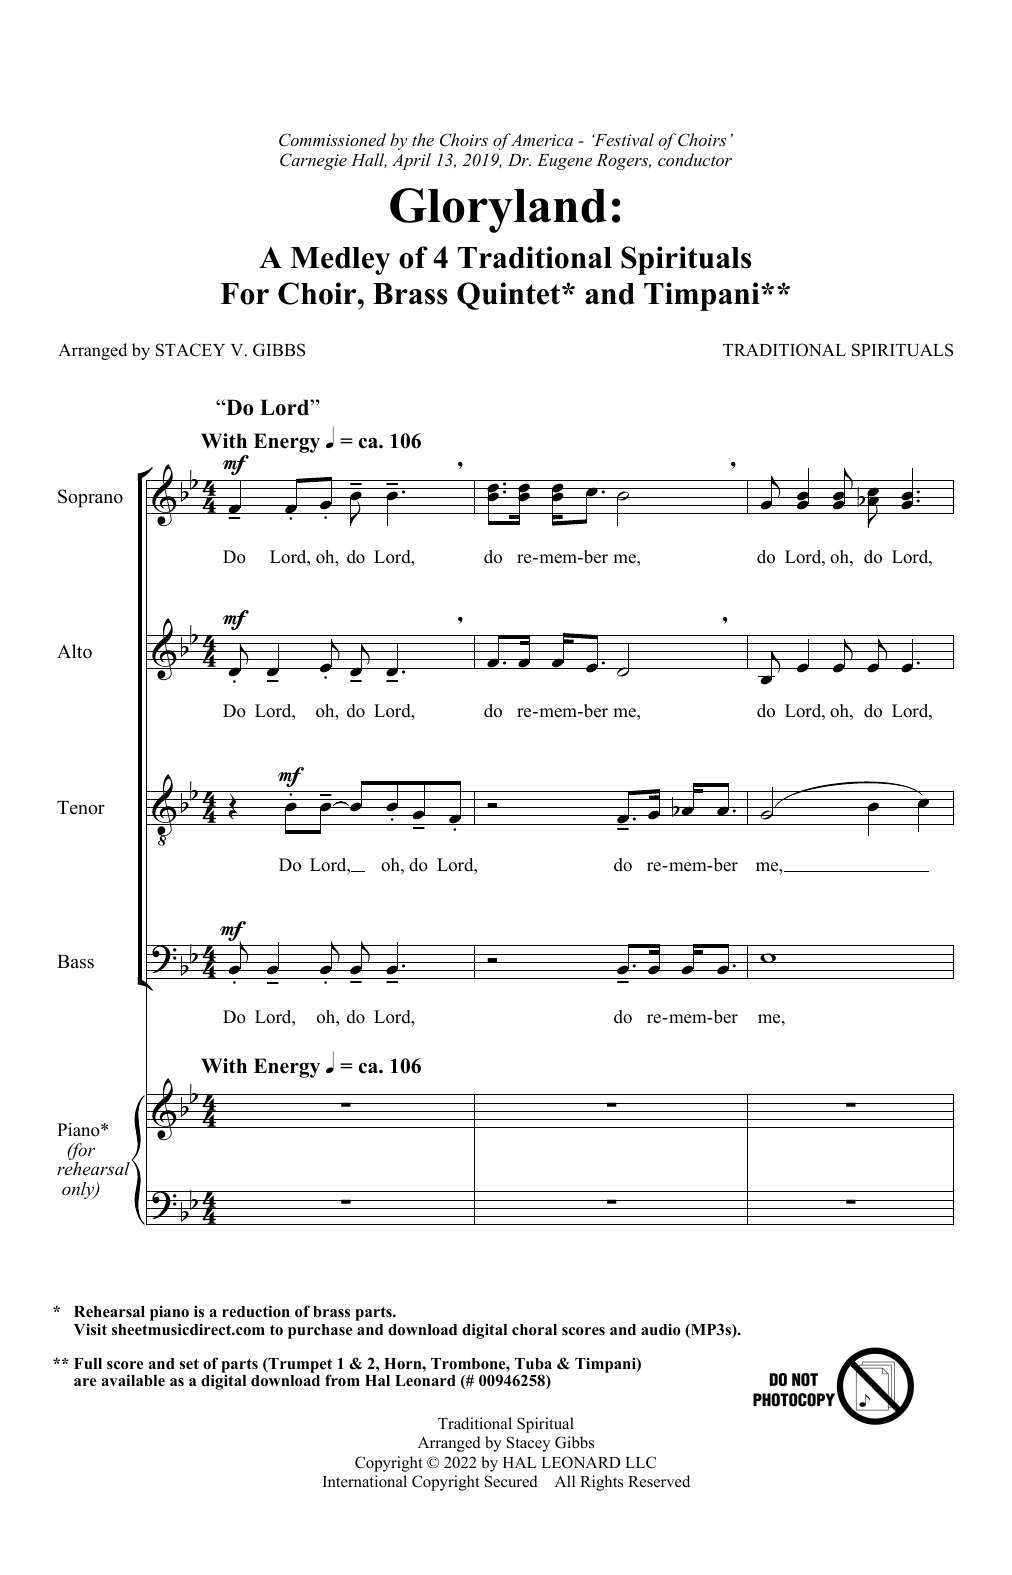 Download Stacey V. Gibbs Gloryland: A Medley of Four Traditional Sheet Music